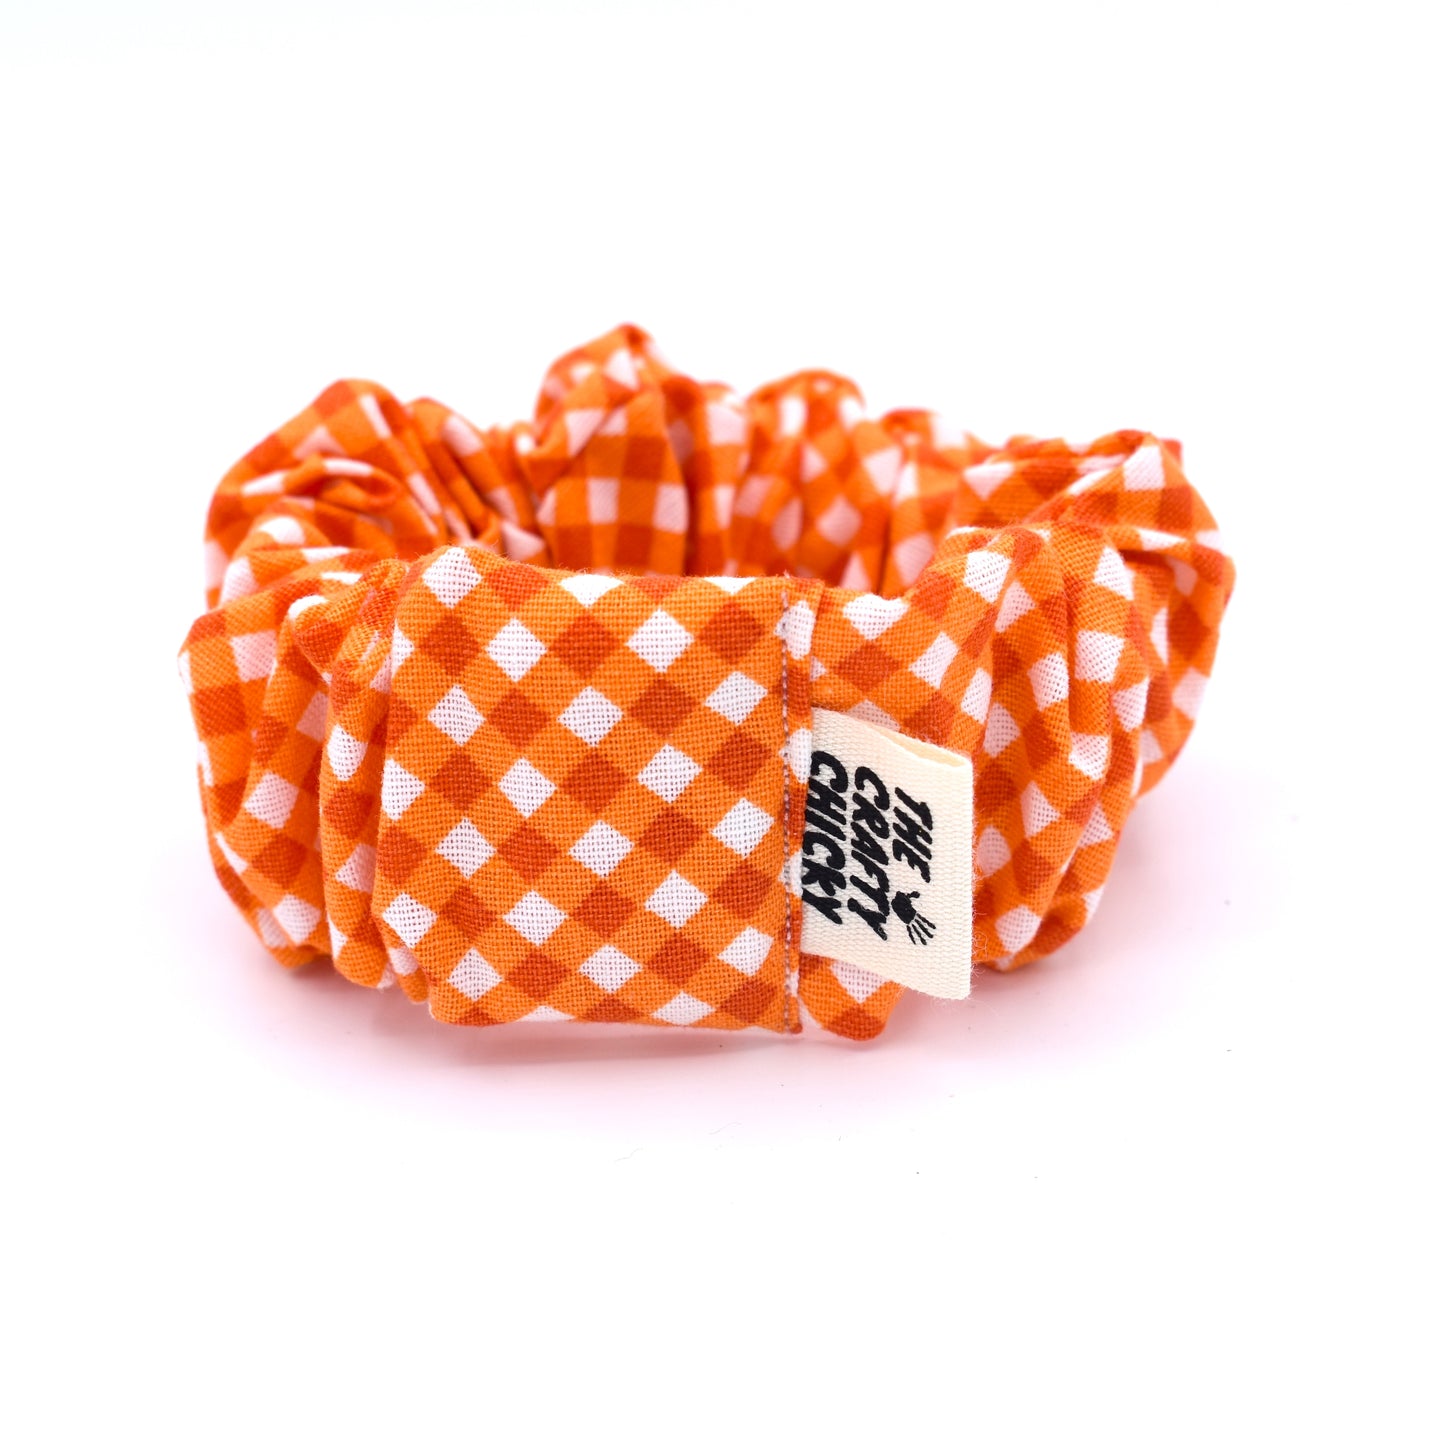 Orange Checked Scrunchie with The Crafty Chicky tag